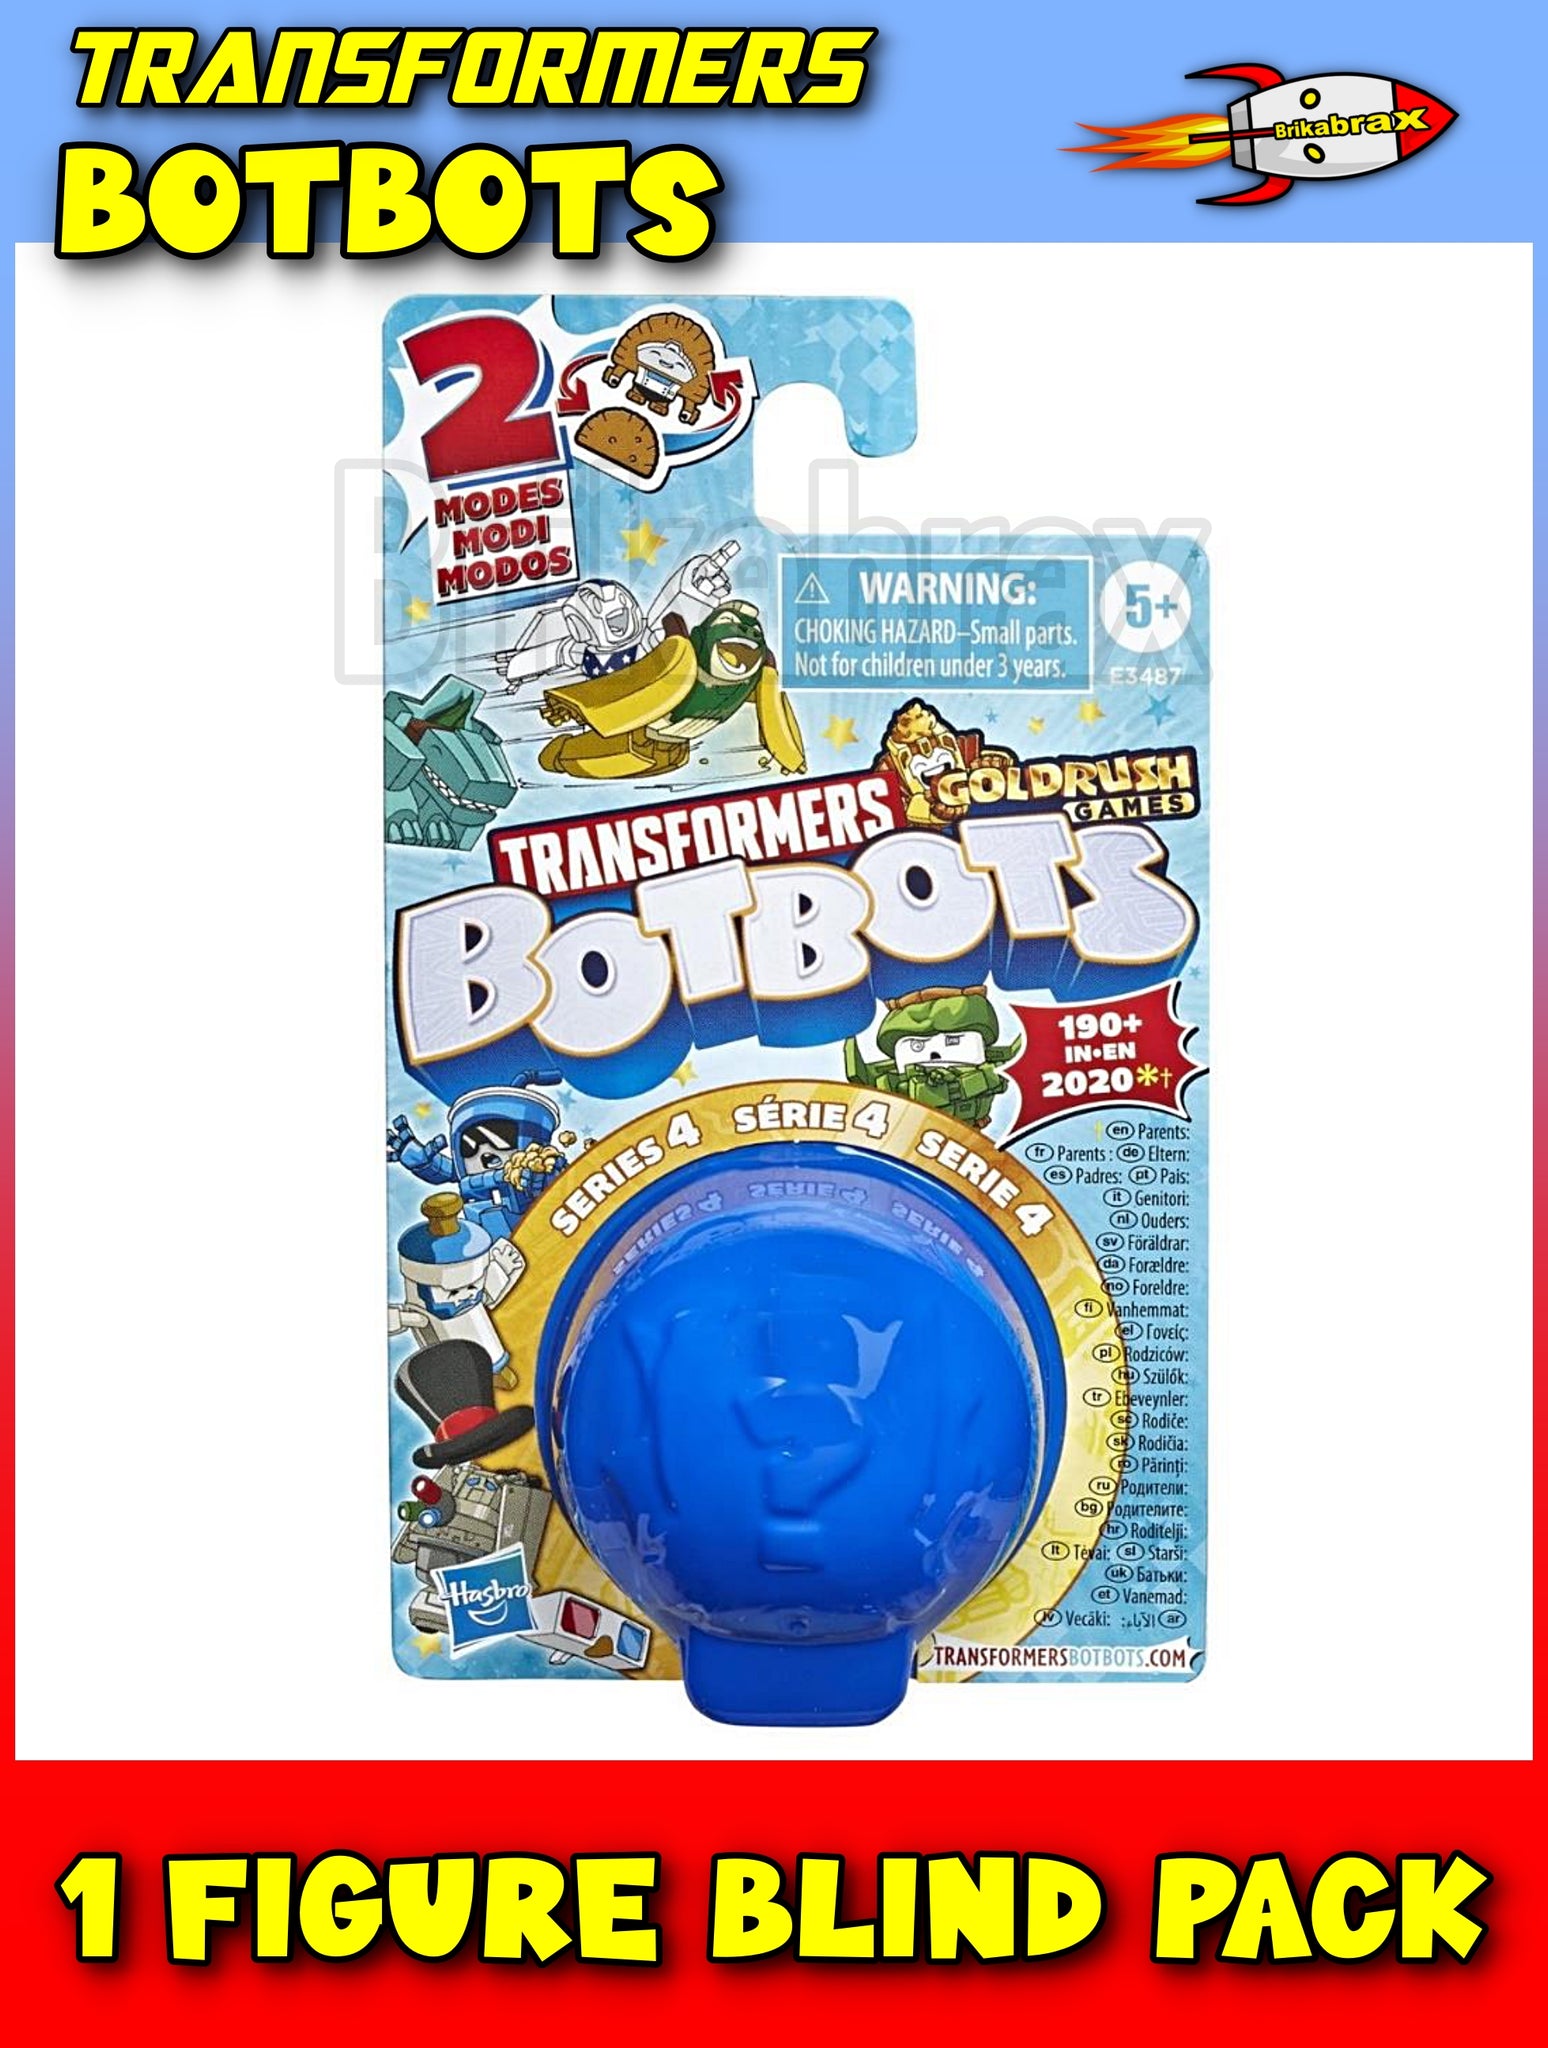 Transformer BotBots Series 4 Blind Pack Bag Box Surprise Figures Toy Collectible (One Supplied) New